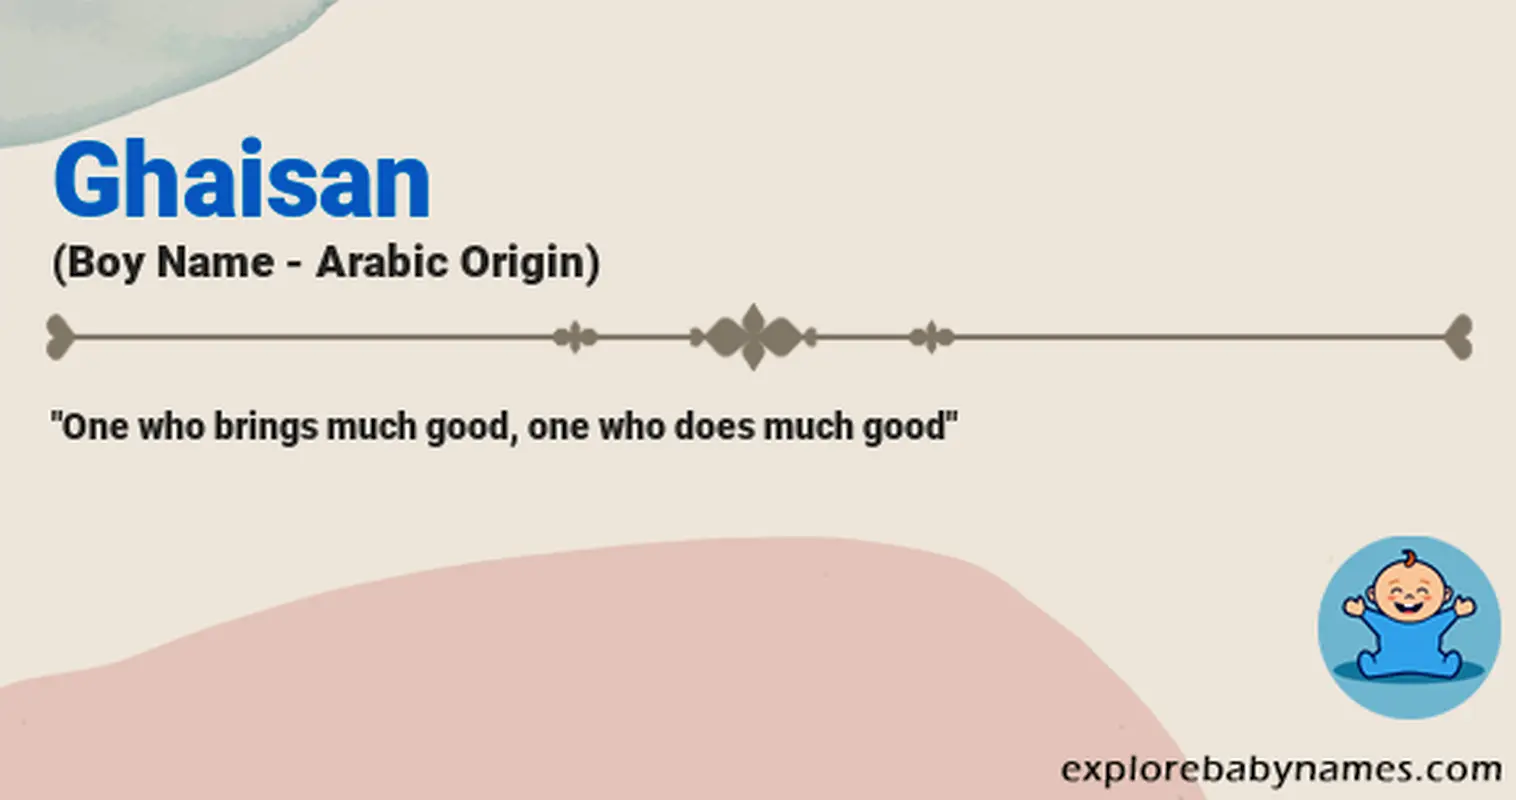 Meaning of Ghaisan